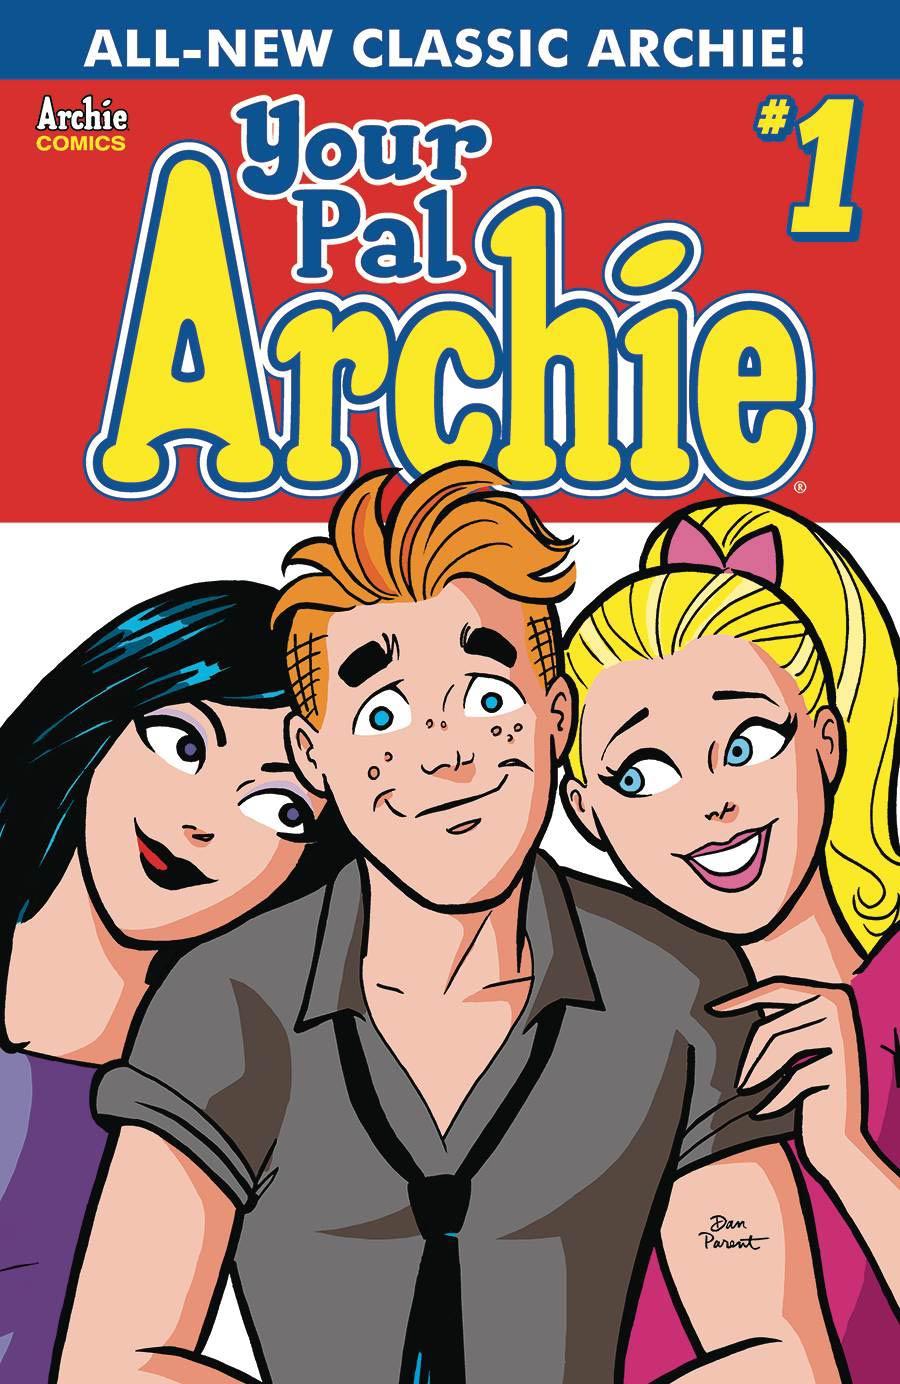 All-New Classic Archie Your Pal Archie Vol. 1 #1